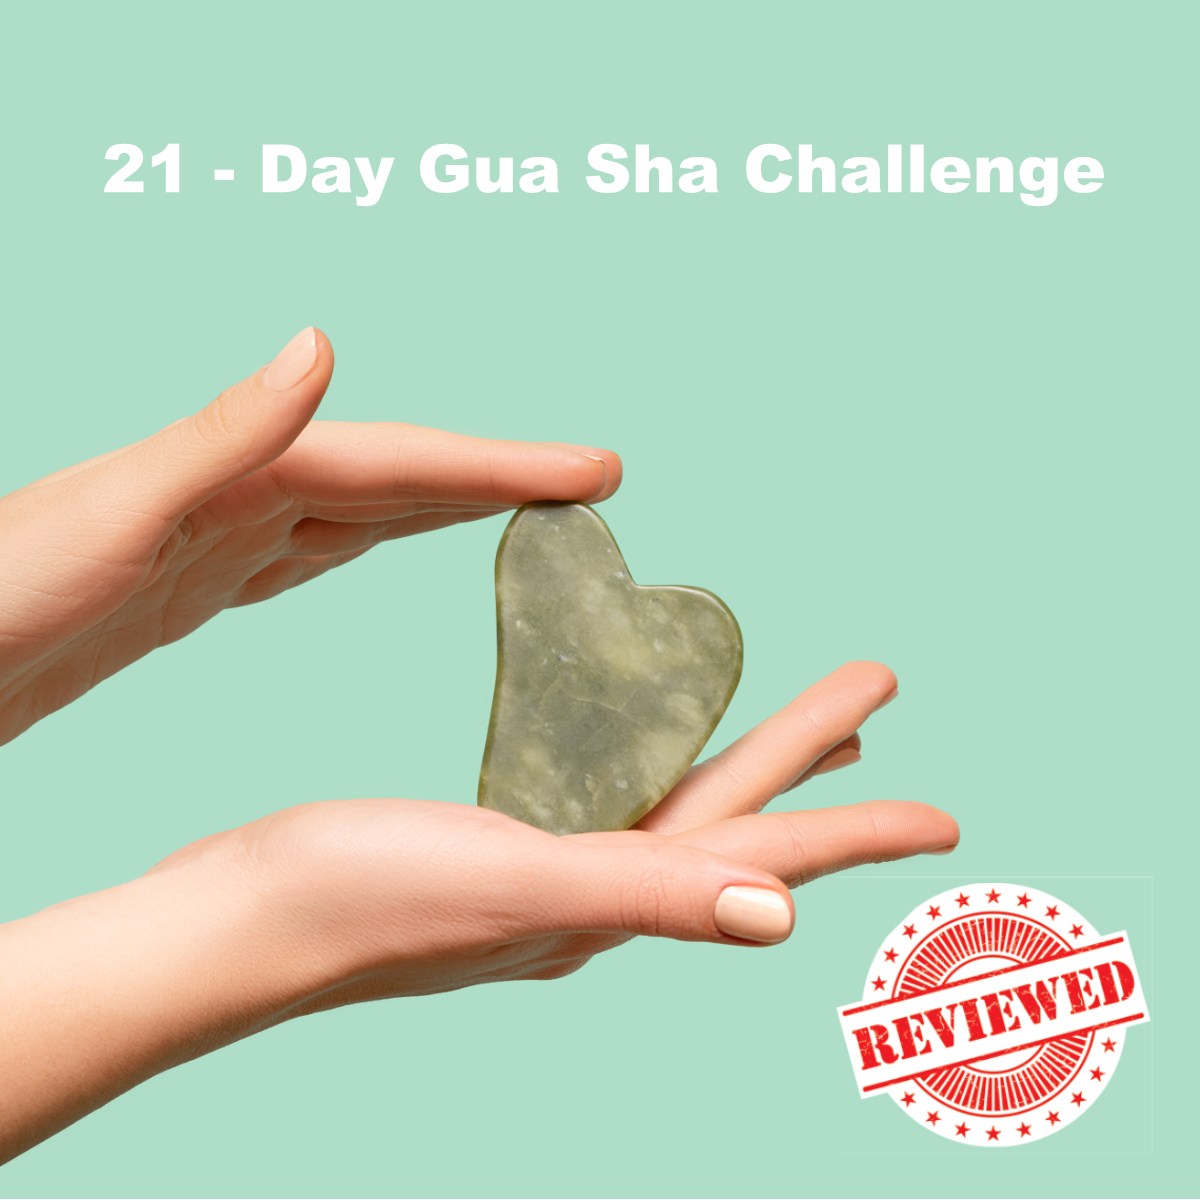 21 Day Gua Sha Challenge Review